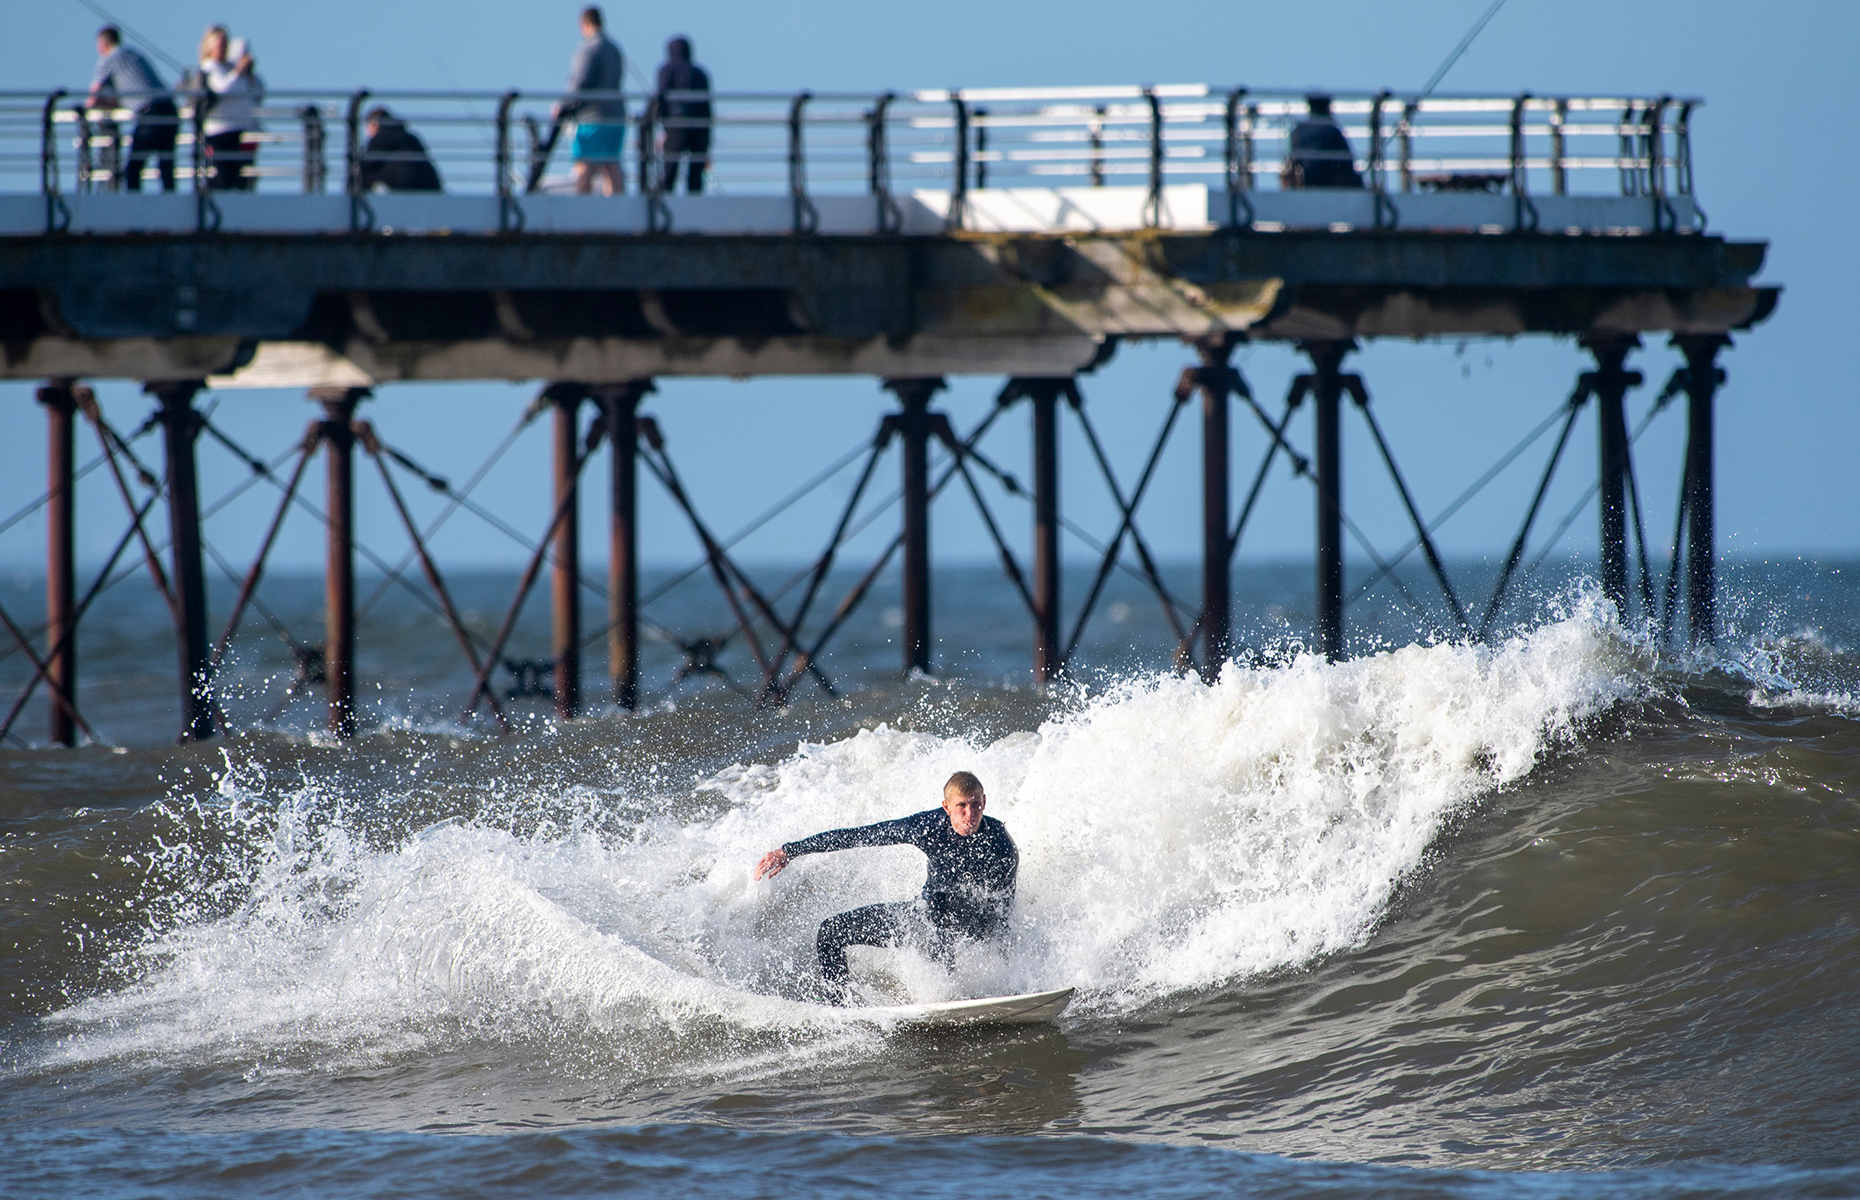 Surfing at Saltburn-by-the-Sea, England. (Image: JordanCrosby/Shutterstock)